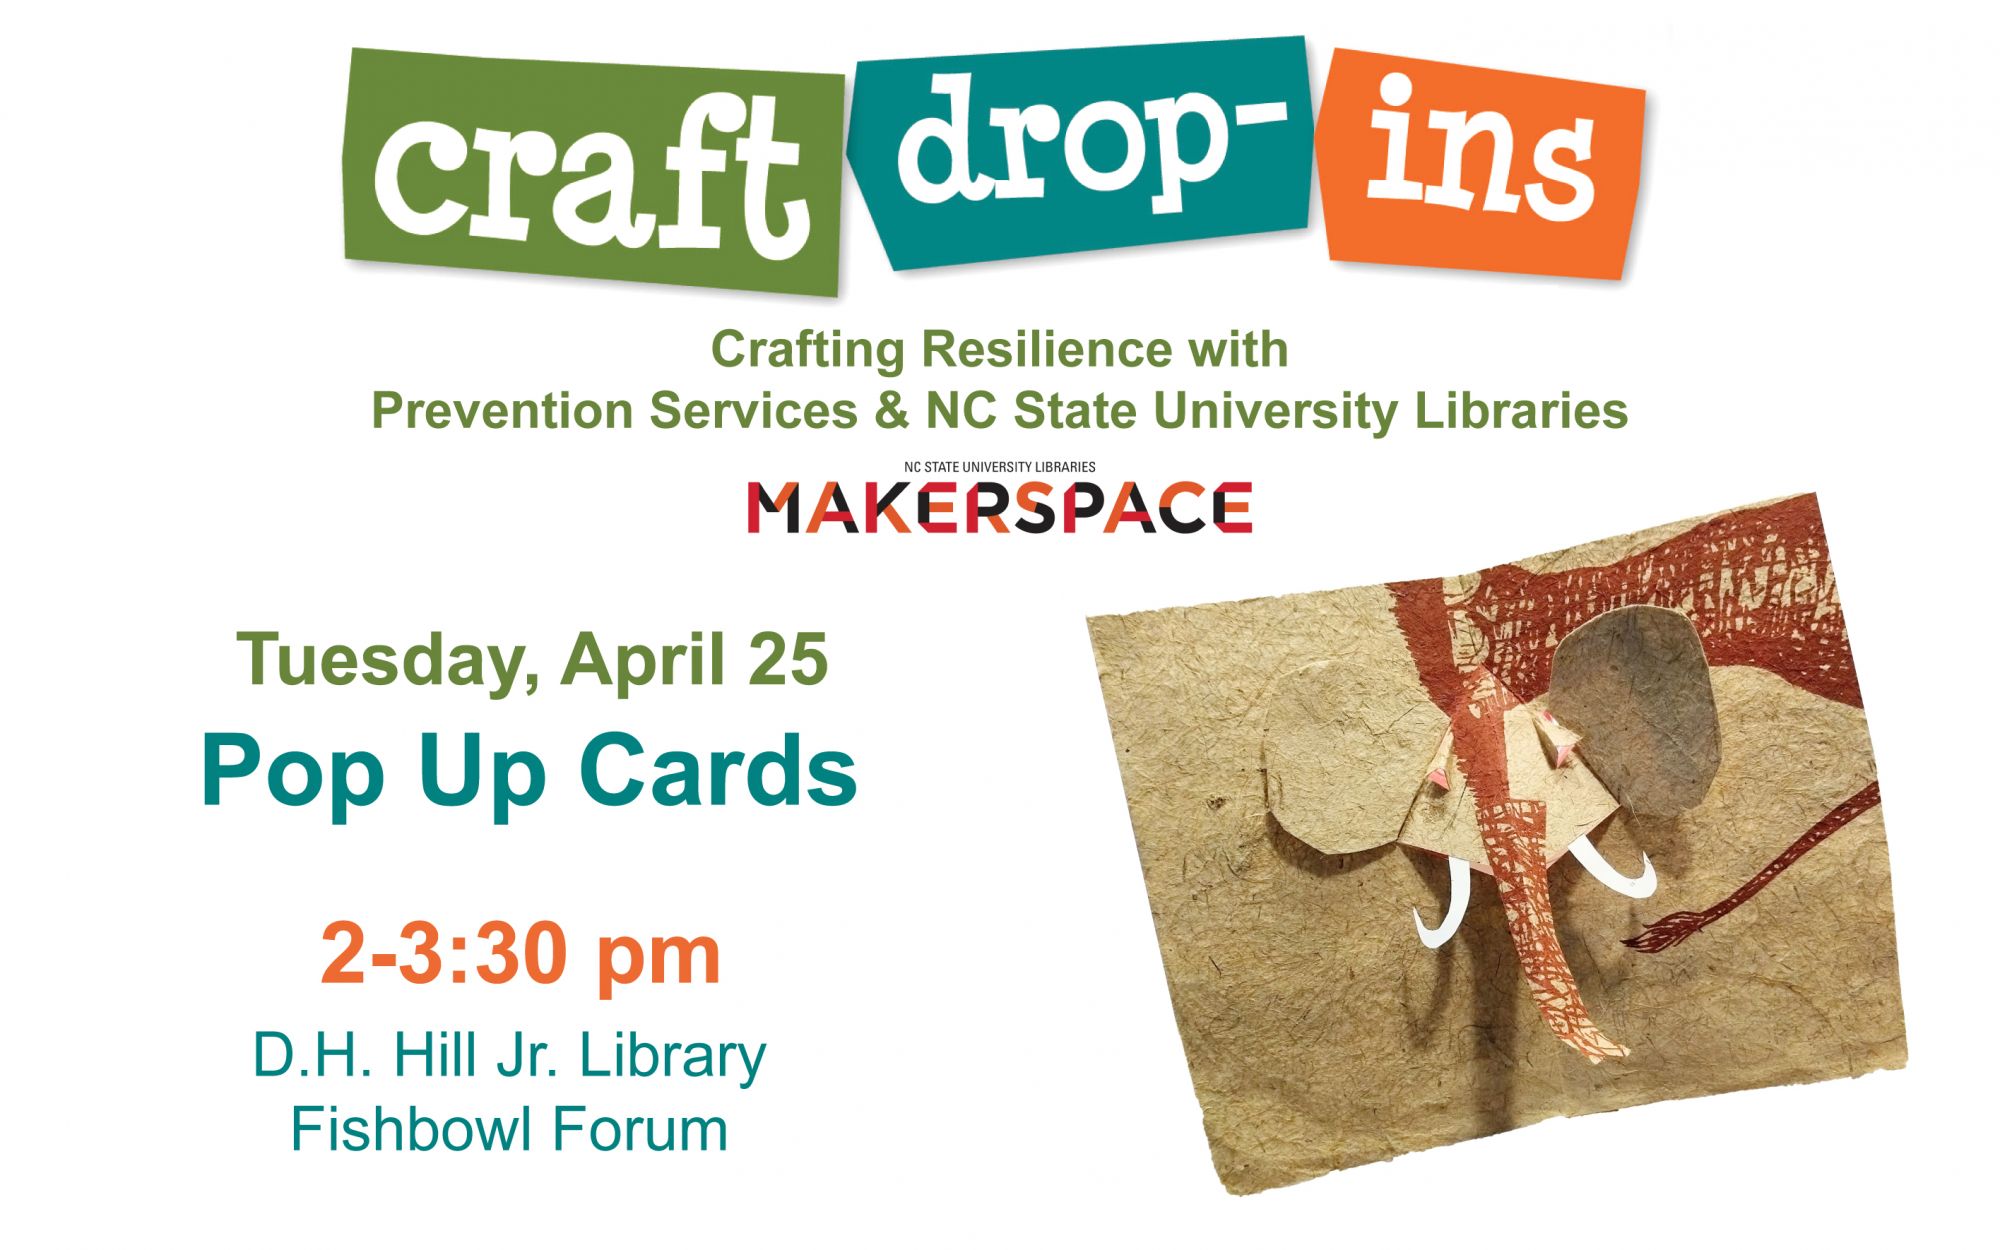 Image of a paper craft elephant with event details. "Craft Drop-In. 2 - 3:30pm, Tuesday, April 25, 2023"